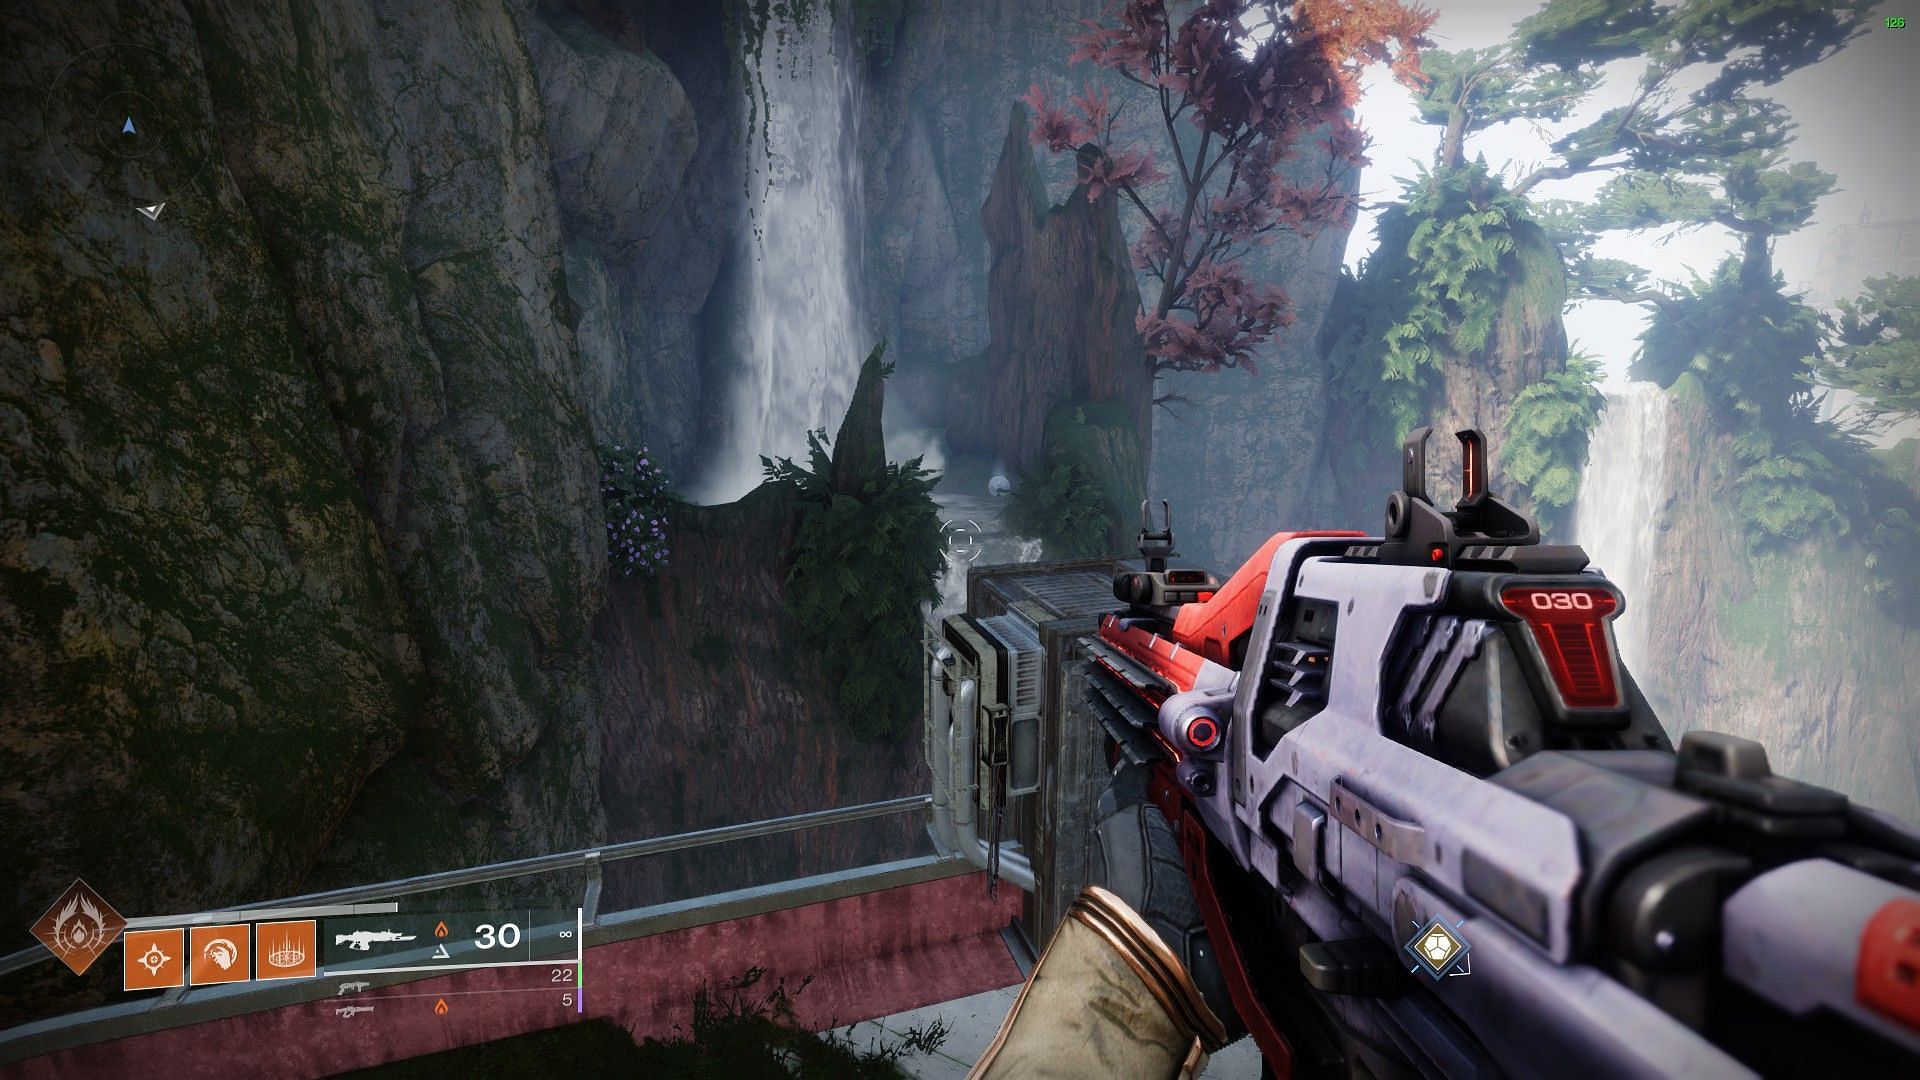 Vision on top of the waterfall (Image via Bungie)